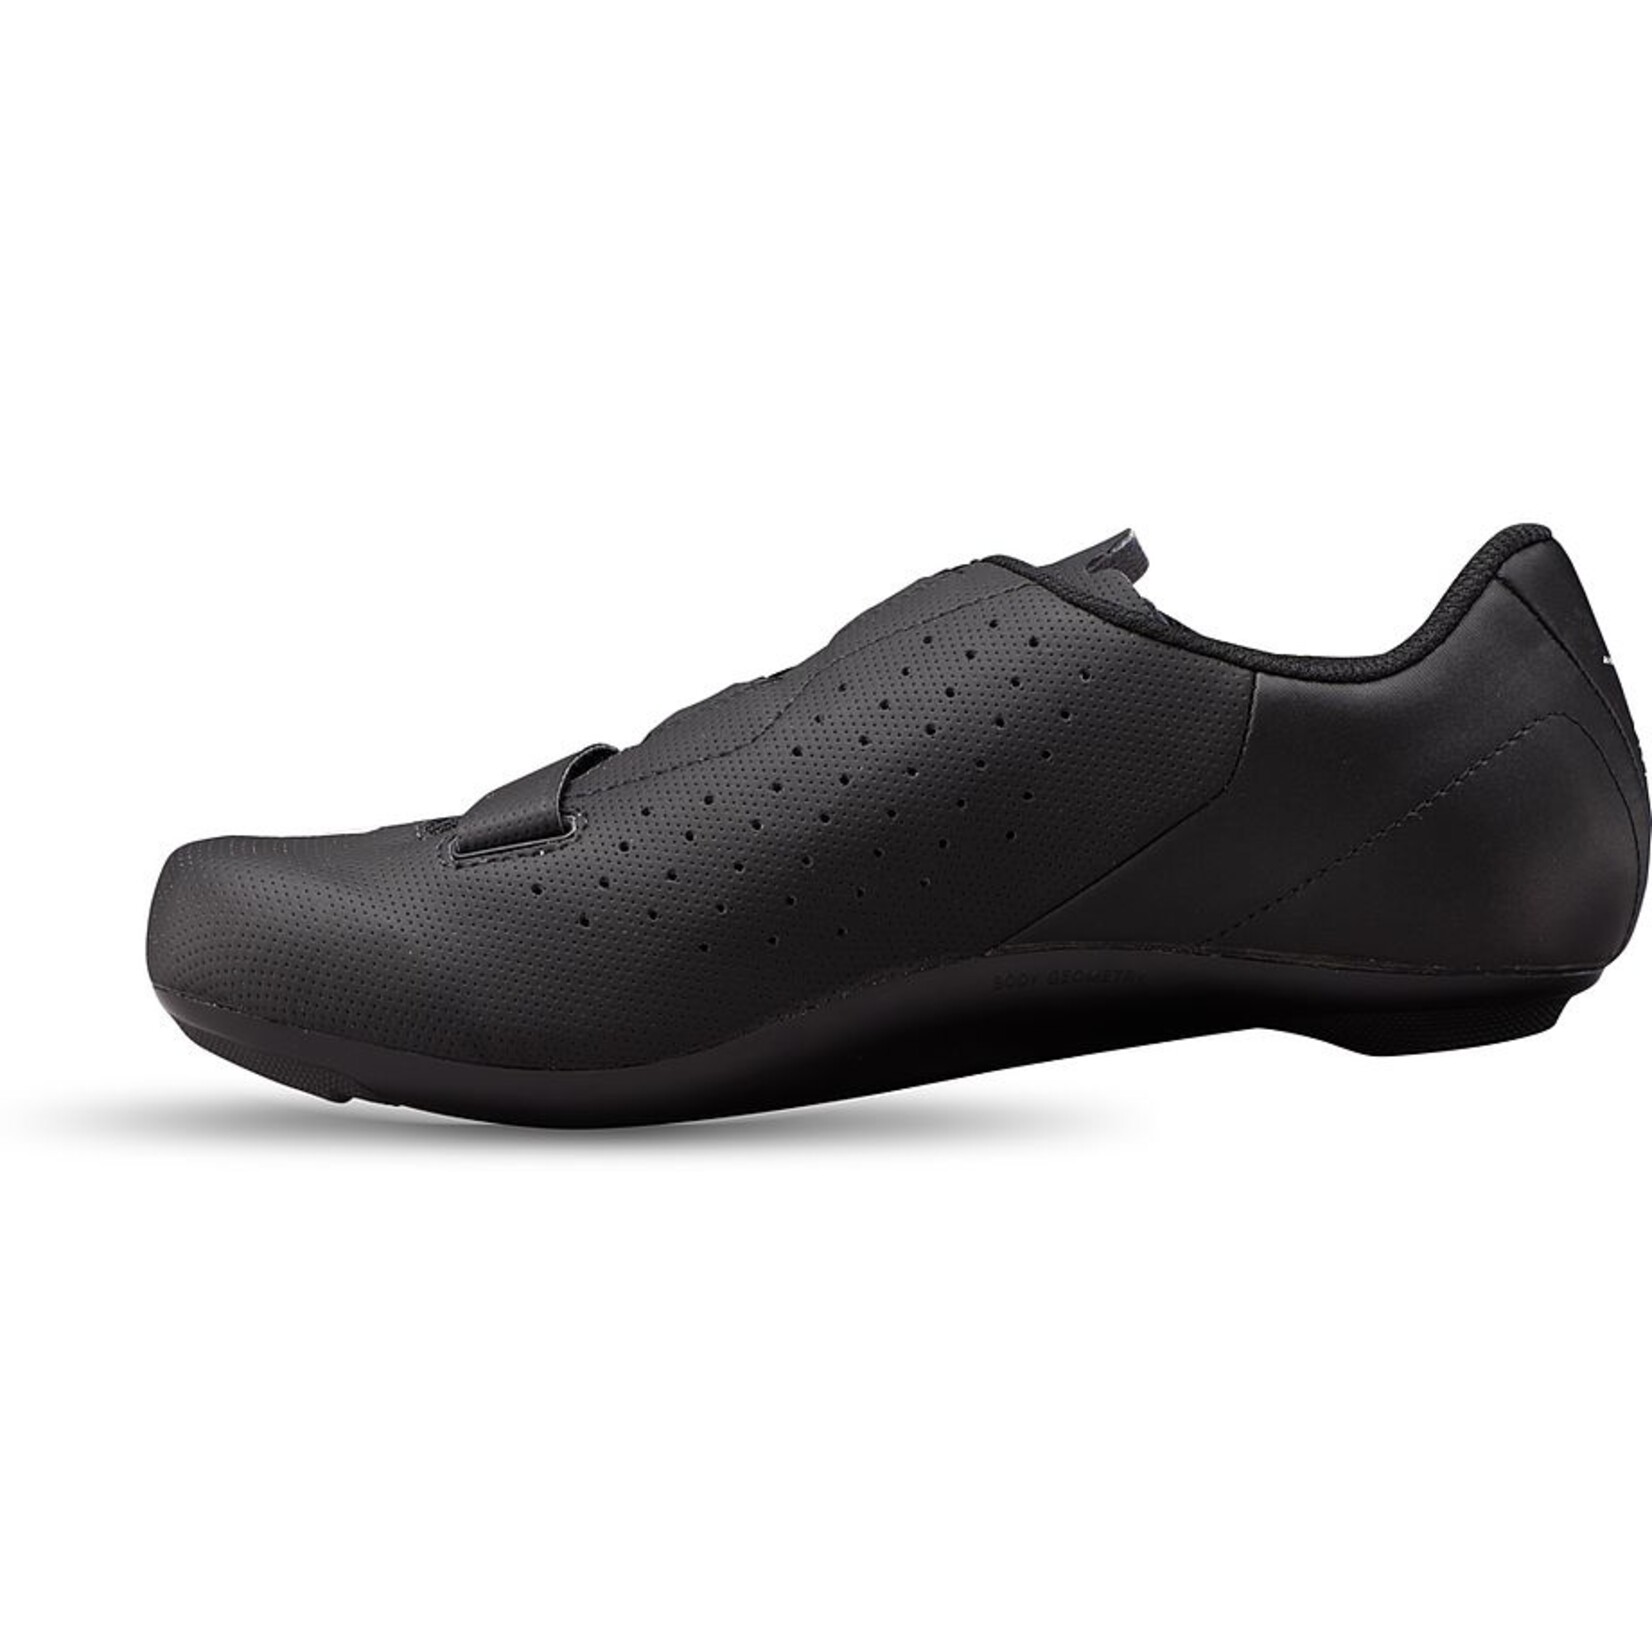 Specialized Torch 1.0 Road Shoes in Black